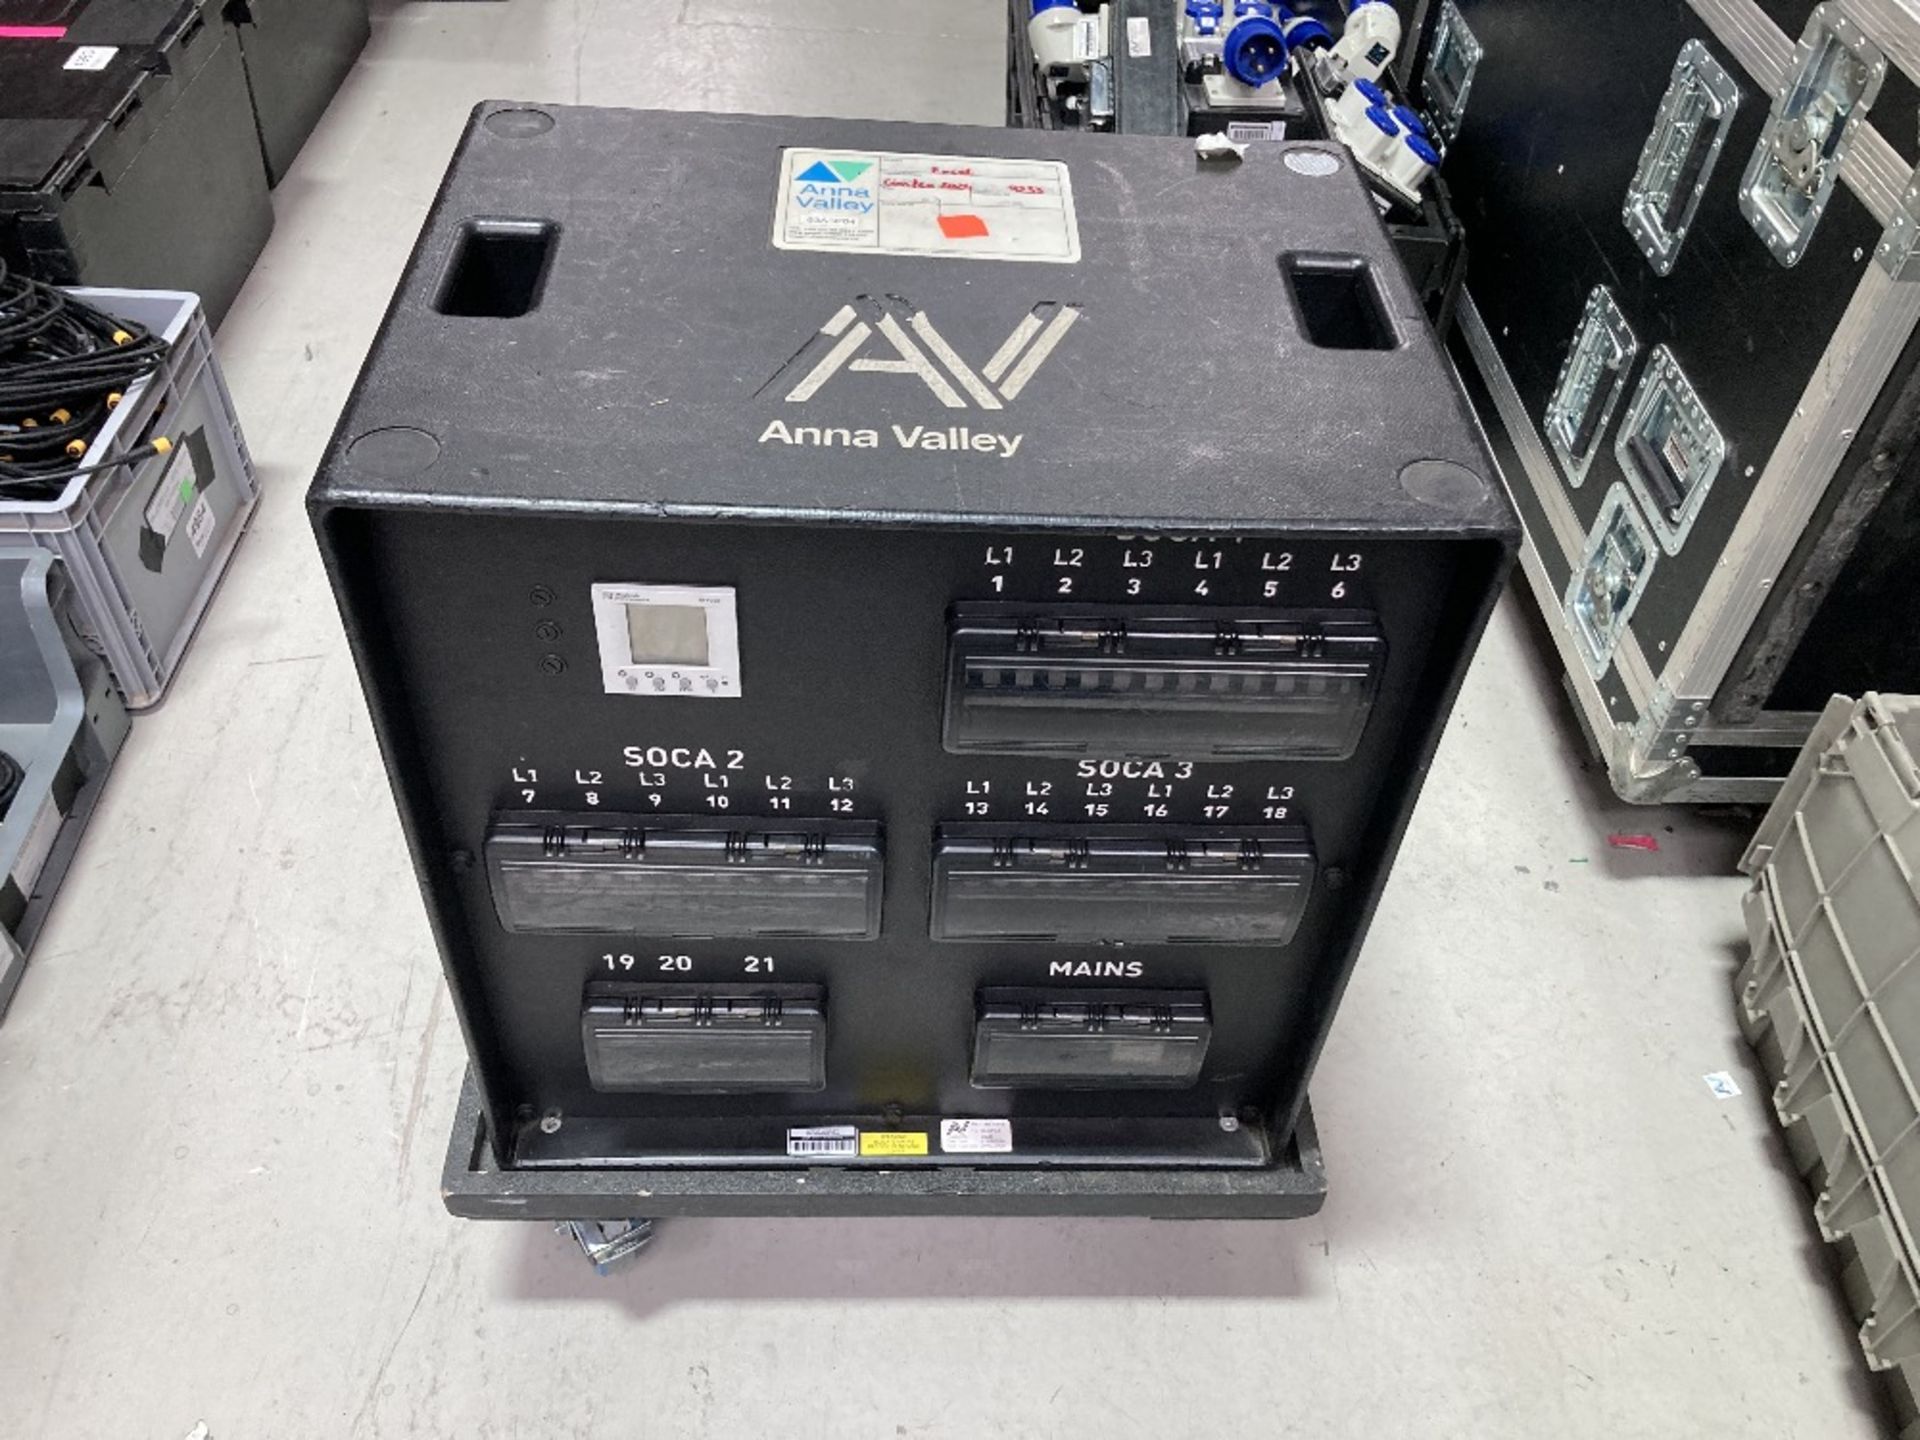 63amp Power Distribution Unit With (2) Mobile Mountable Trolley